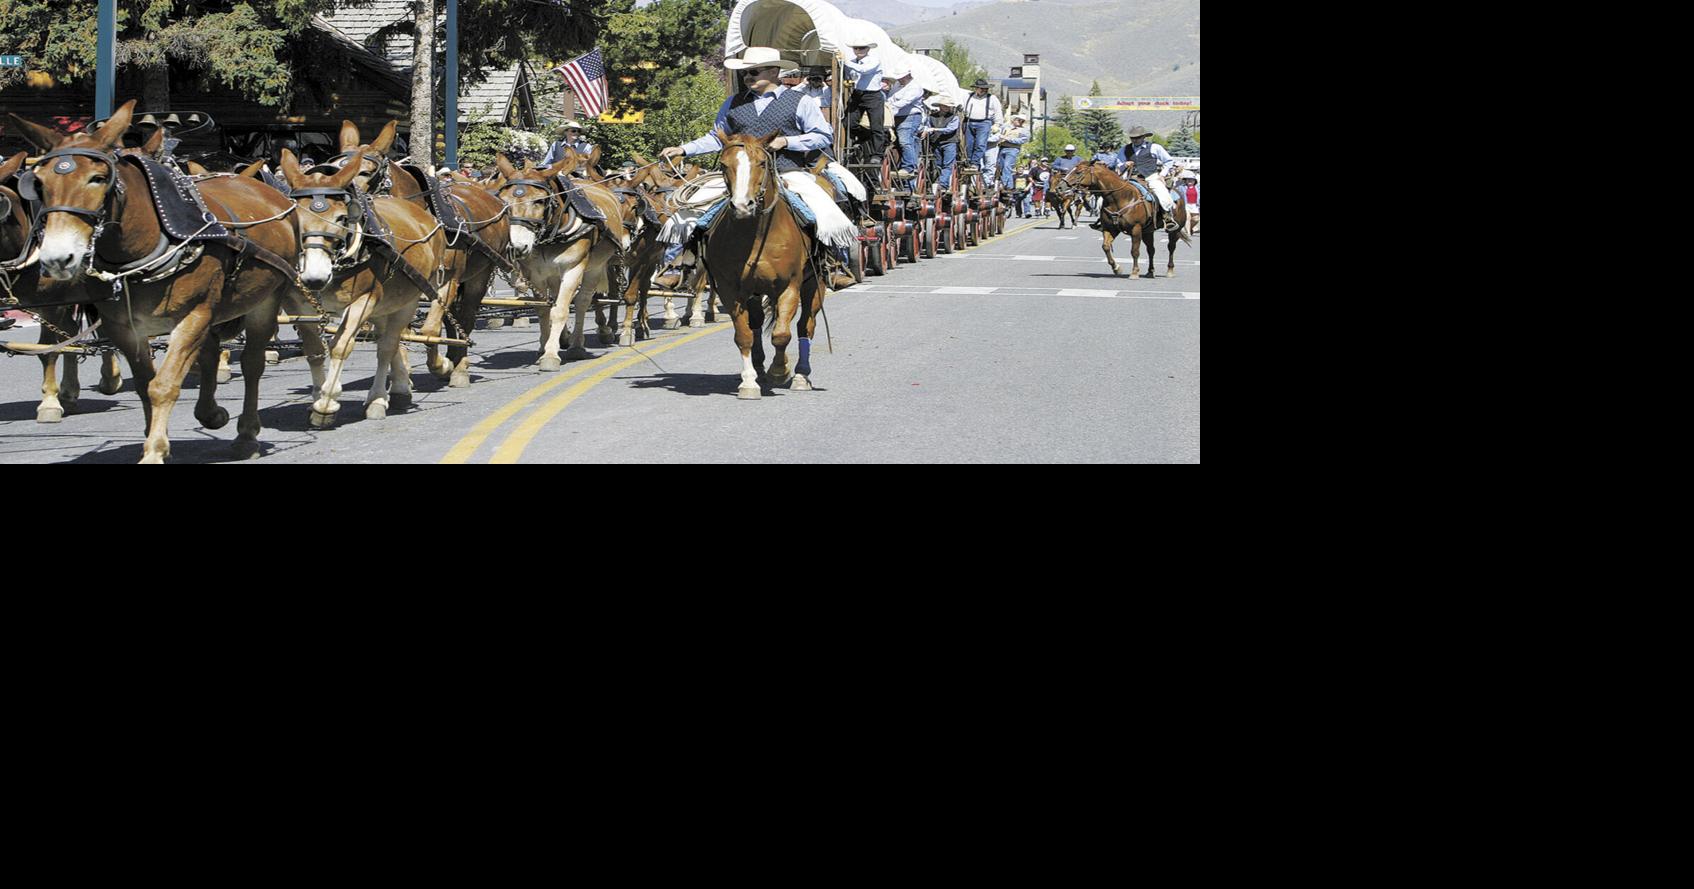 Ketchum is back in the saddle for Wagon Days Ketchum